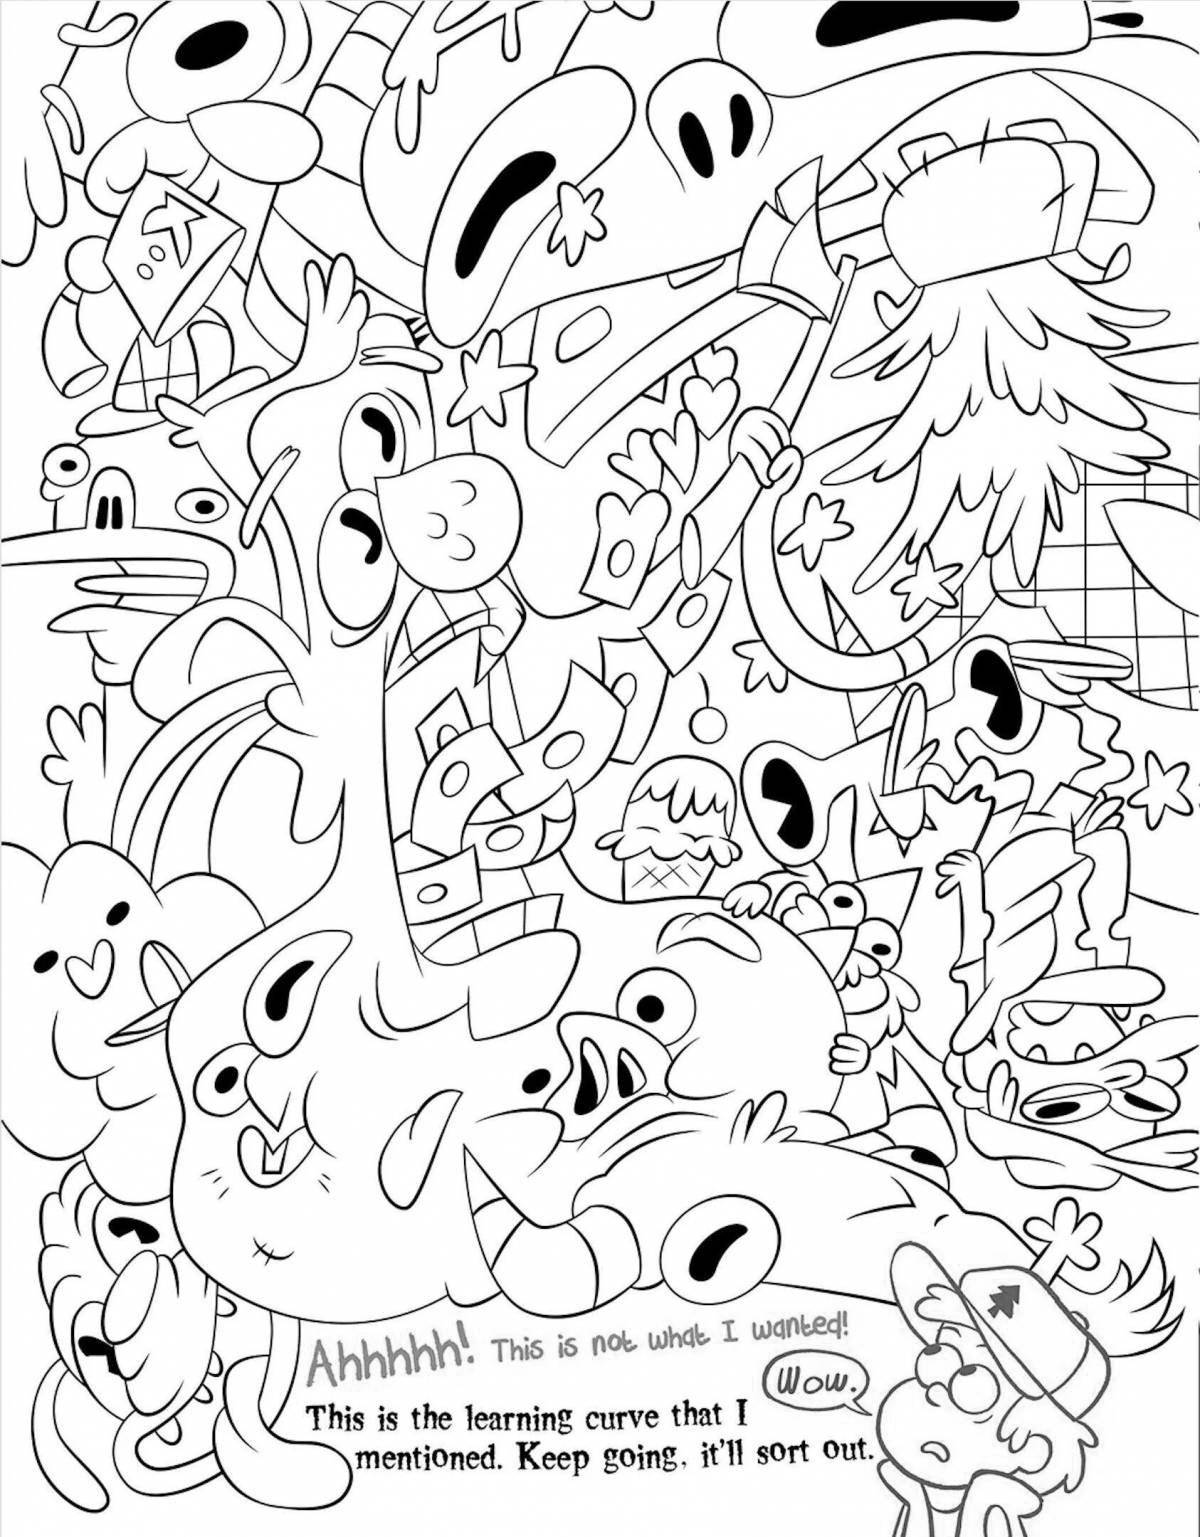 Gravity falls soothing anti-stress coloring book